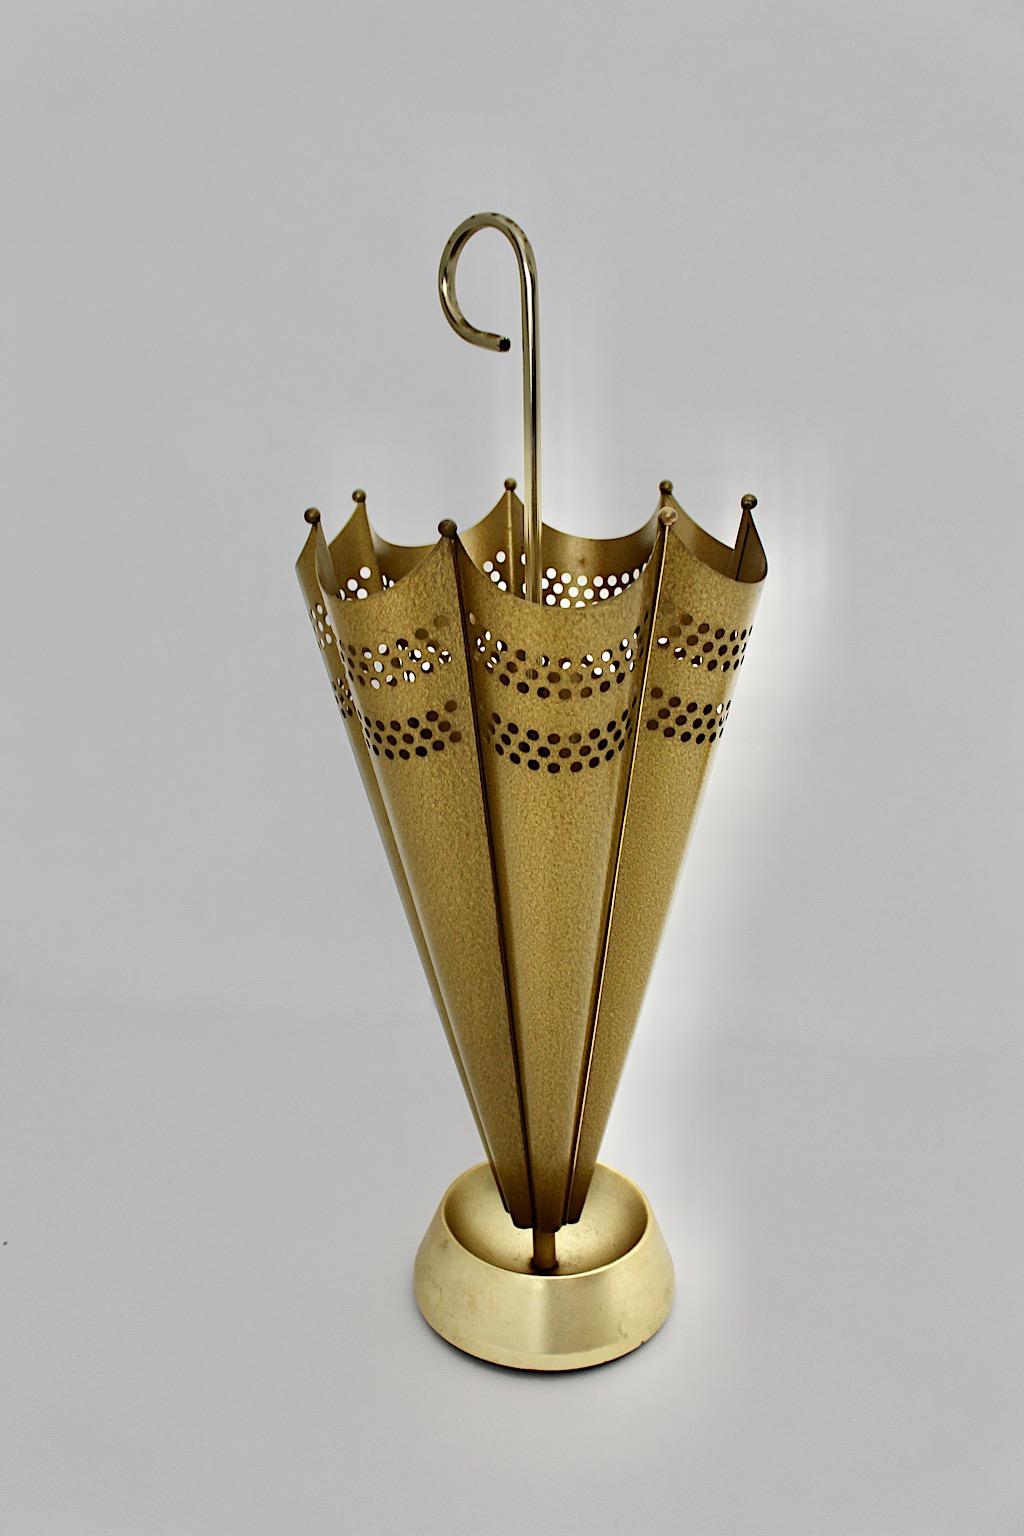 Mid-Century Modern vintage umbrella stand from golden metal and brass 1950s Austria.
A stunning umbrella like umbrella stand in umbrella shape with brass handle and a perforated body from hammered finish and lacquered surface in golden color.
This